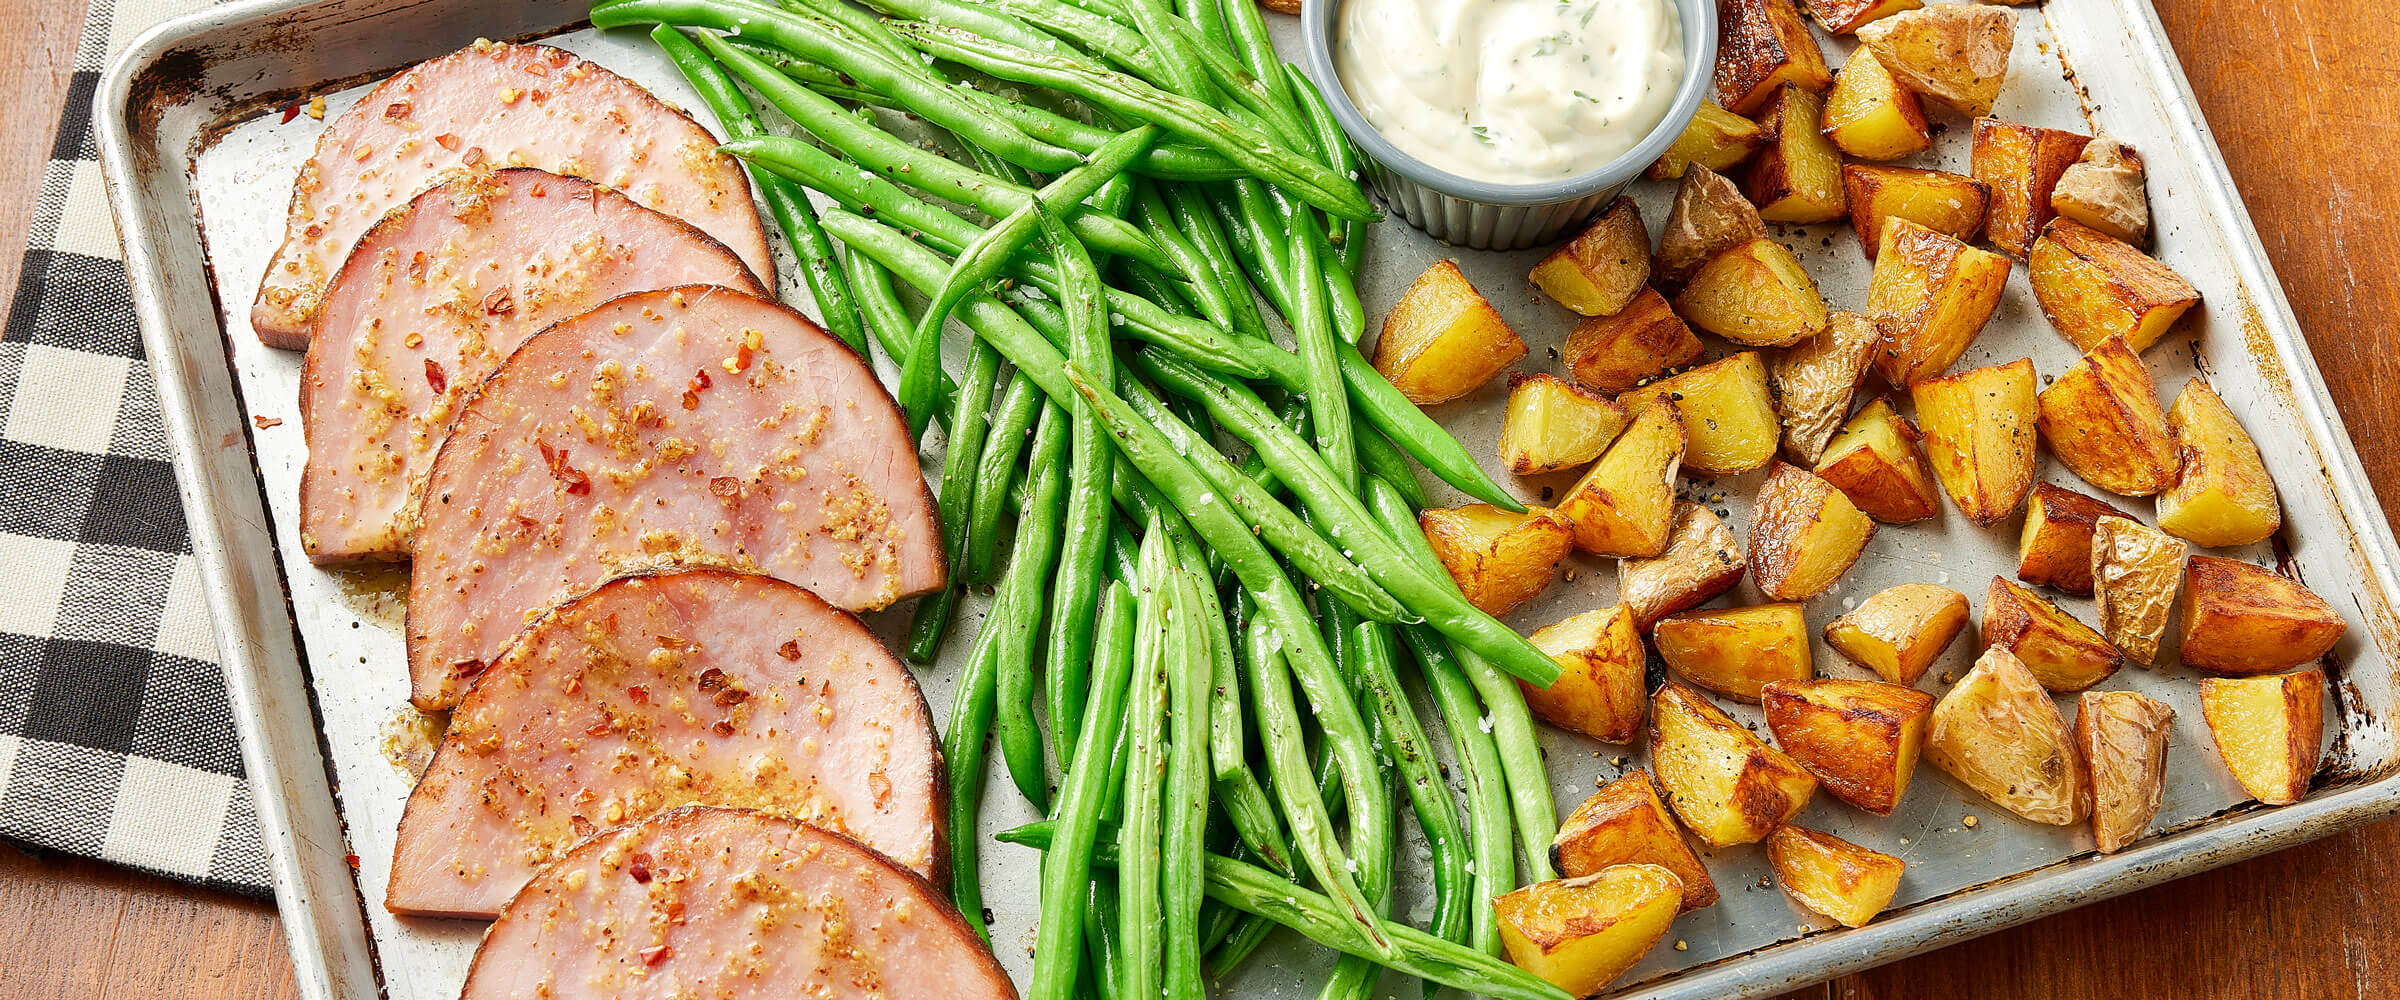 Ham Sheet Pan Dinner with green beans, potatoes and dipping sauce